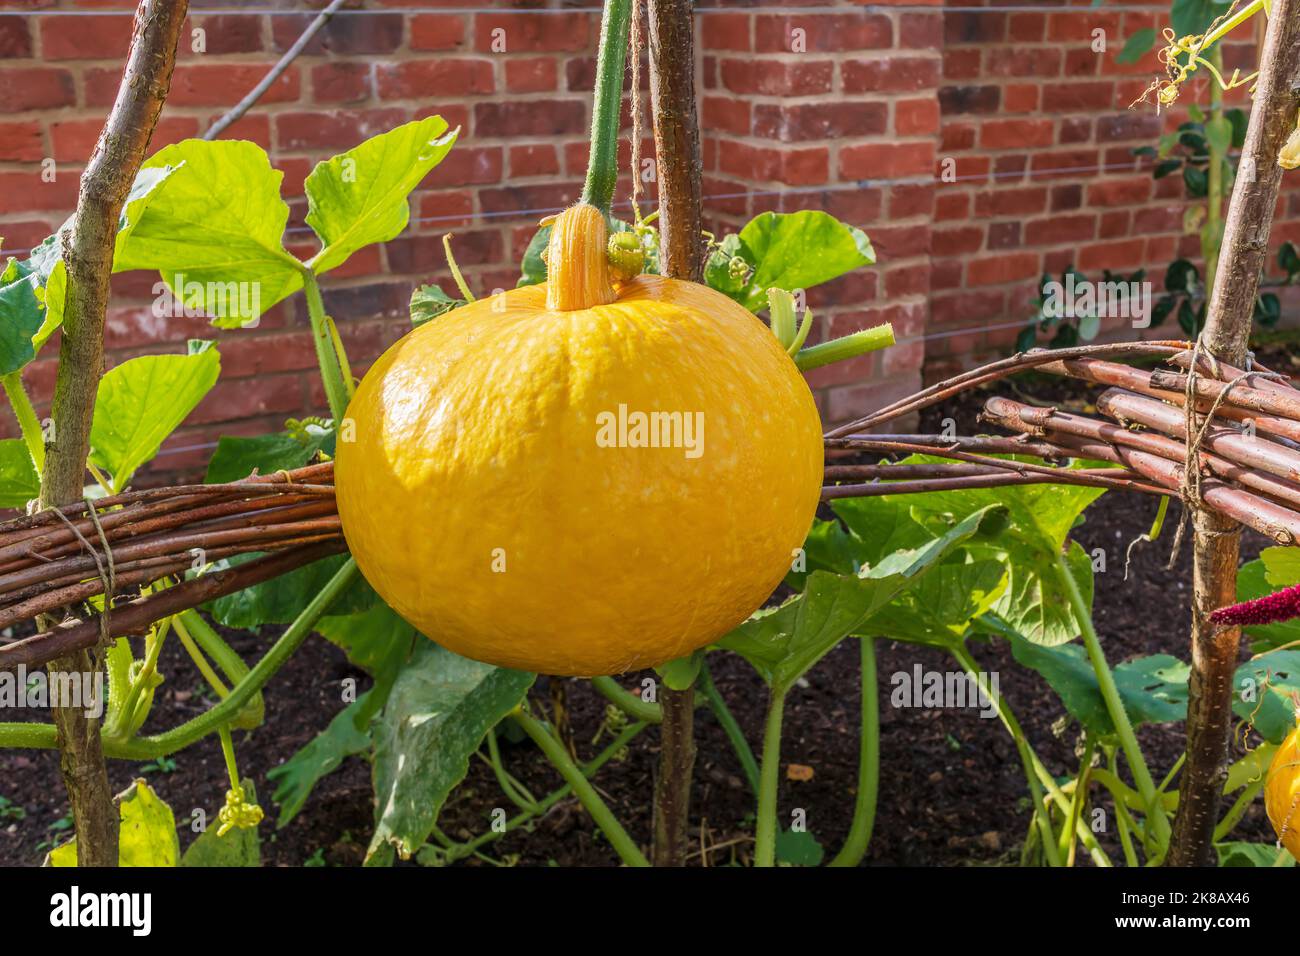 Yellow round pumpkin ready for harvest, growing in a large wicker support frame. Stock Photo